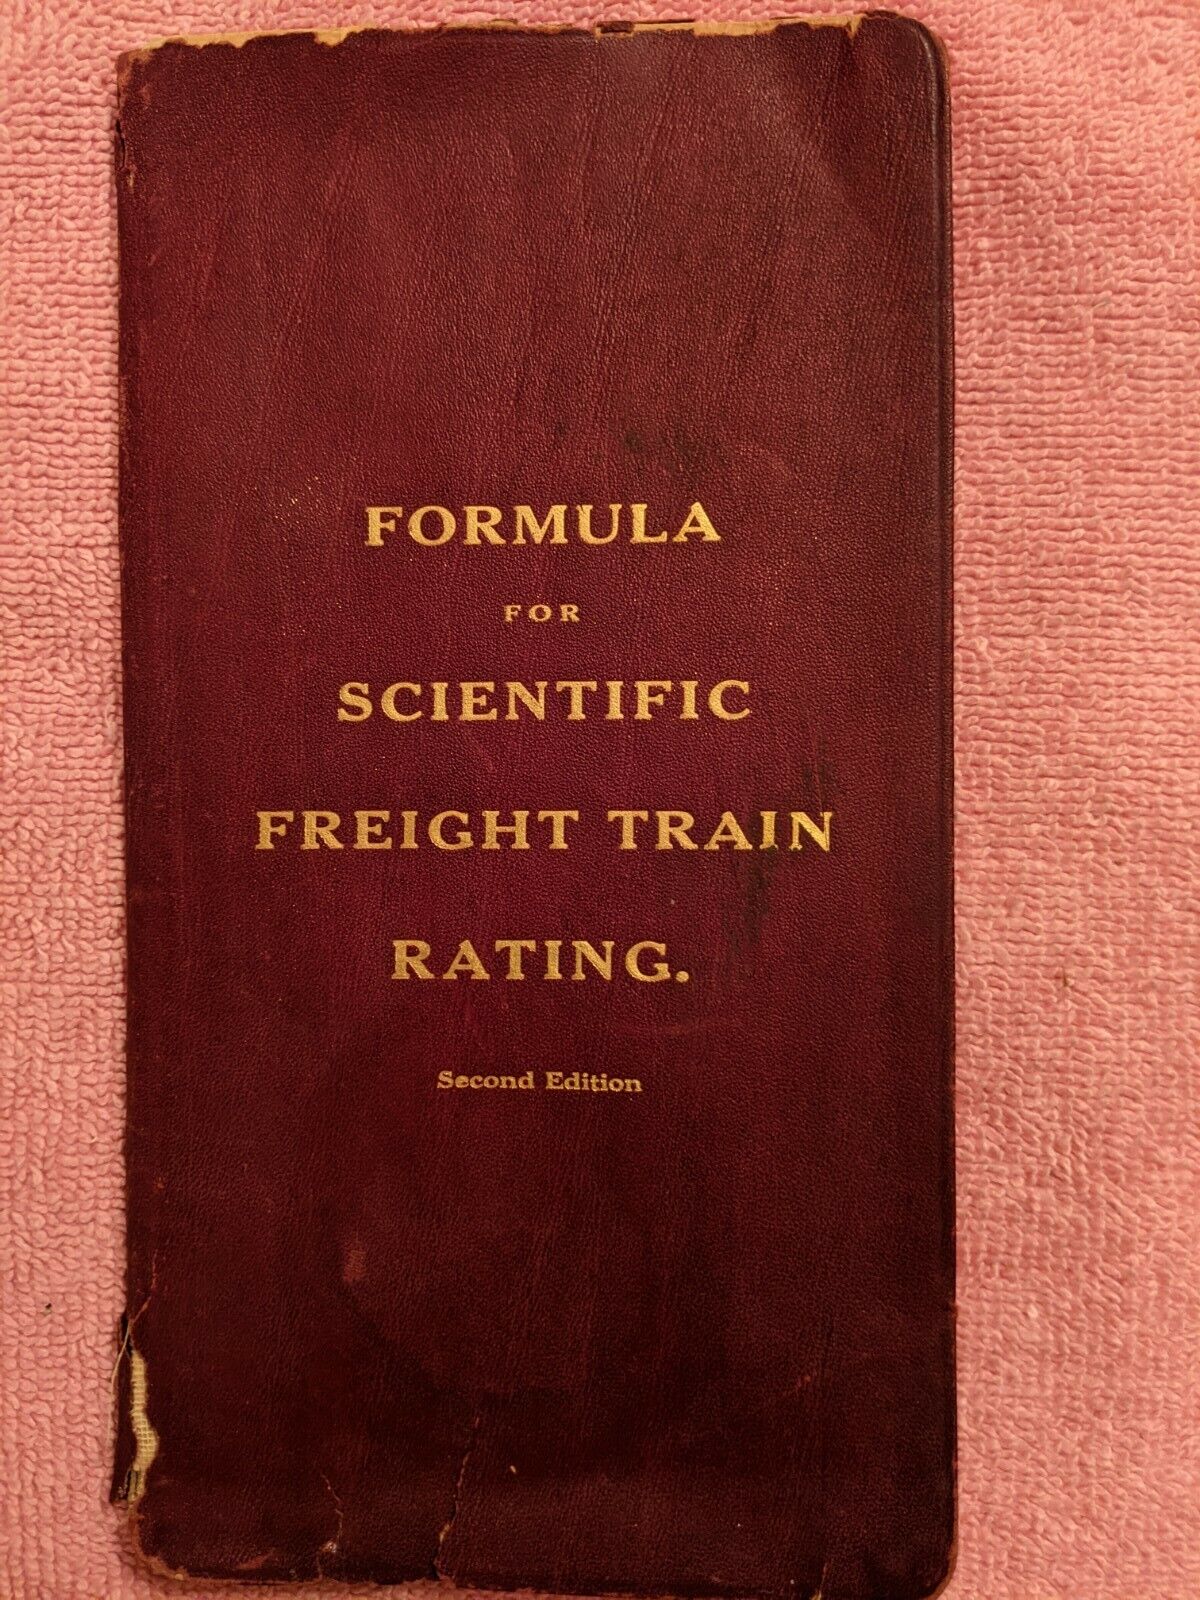 D.C. Cheney, FORMULA FOR SCIENTIFIC FREIGHT TRAIN RATING, 1911, Fair Condition